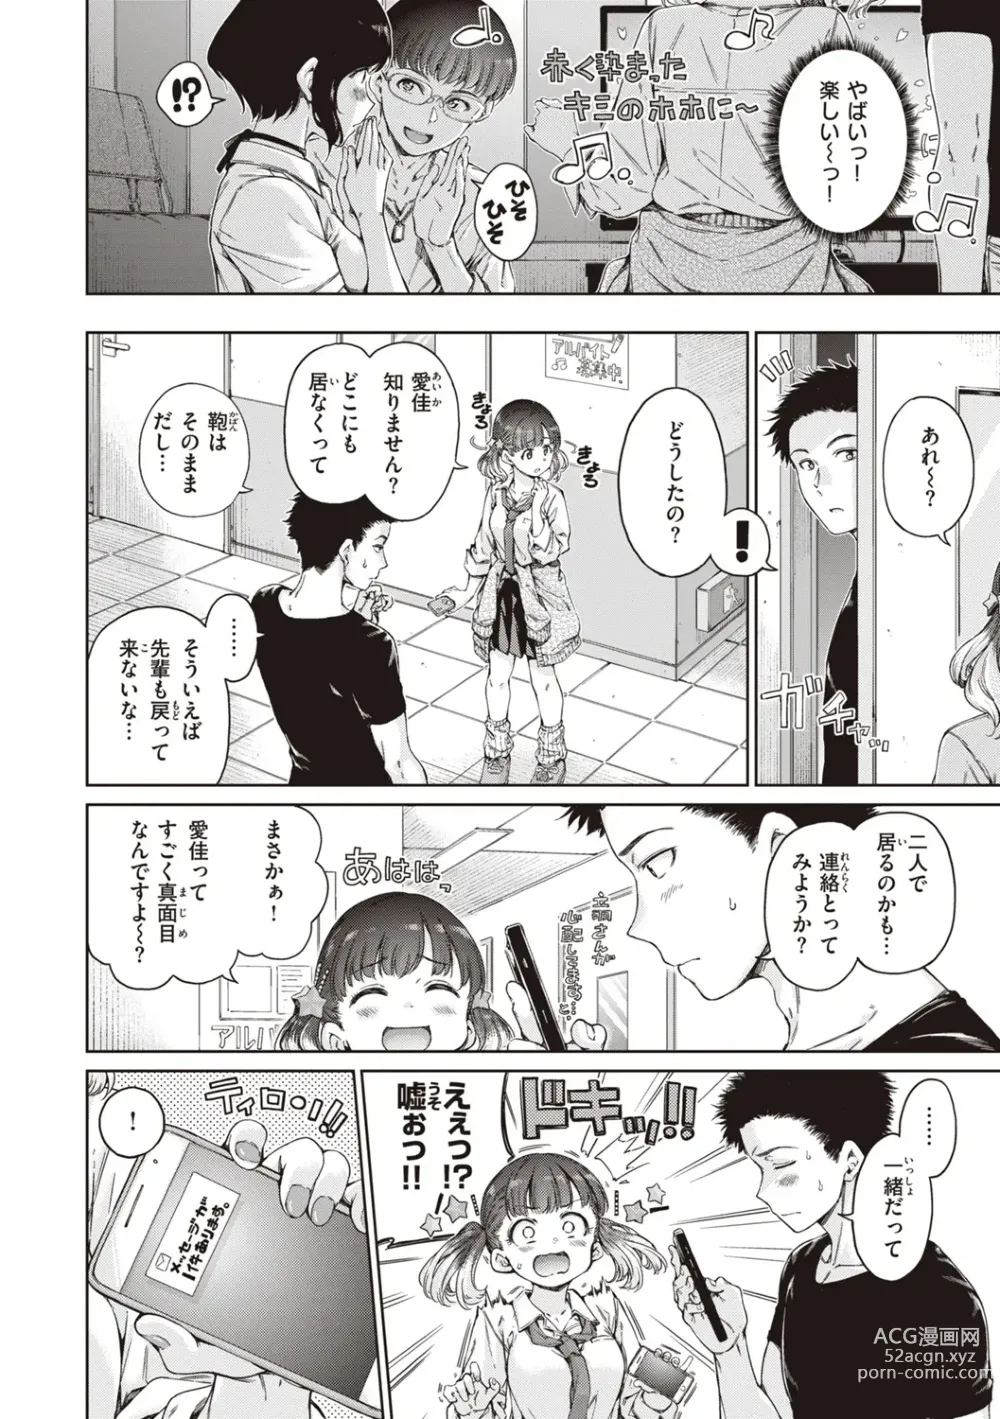 Page 10 of manga Wataame to Caramel - Cotton Candy and Caramel